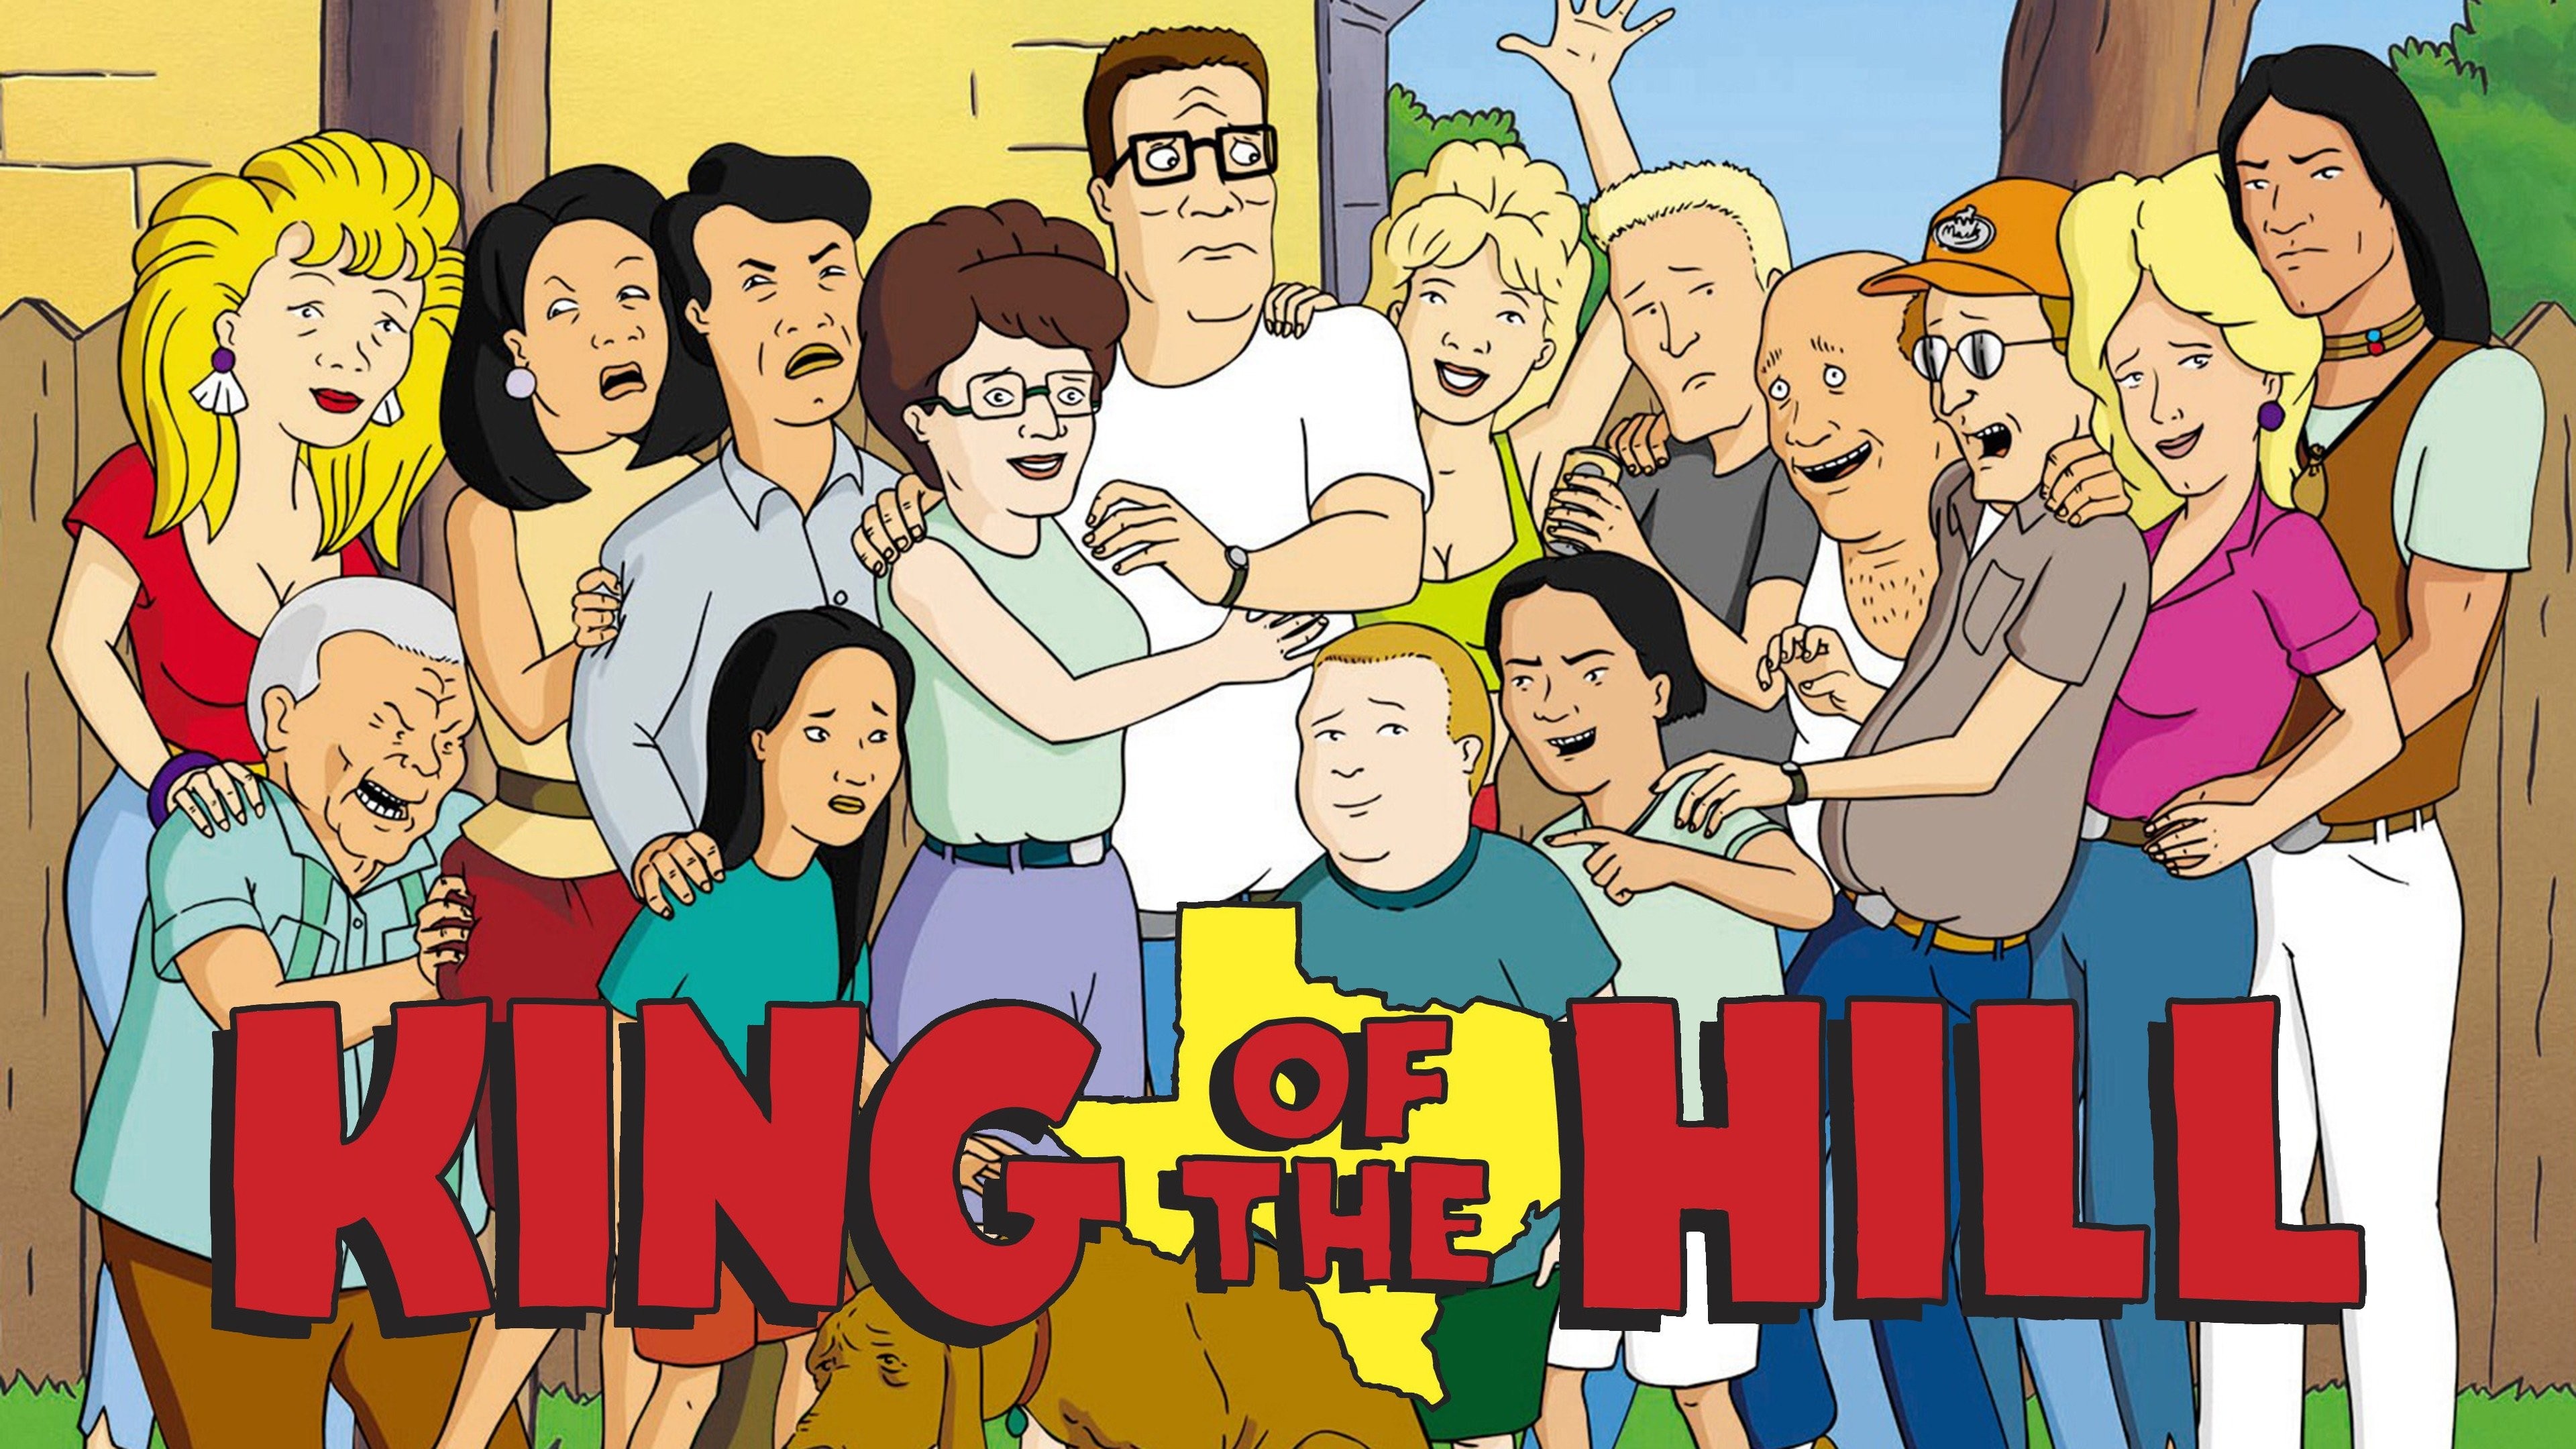 King of the Hill Board Games (TV Episode 2003) - IMDb